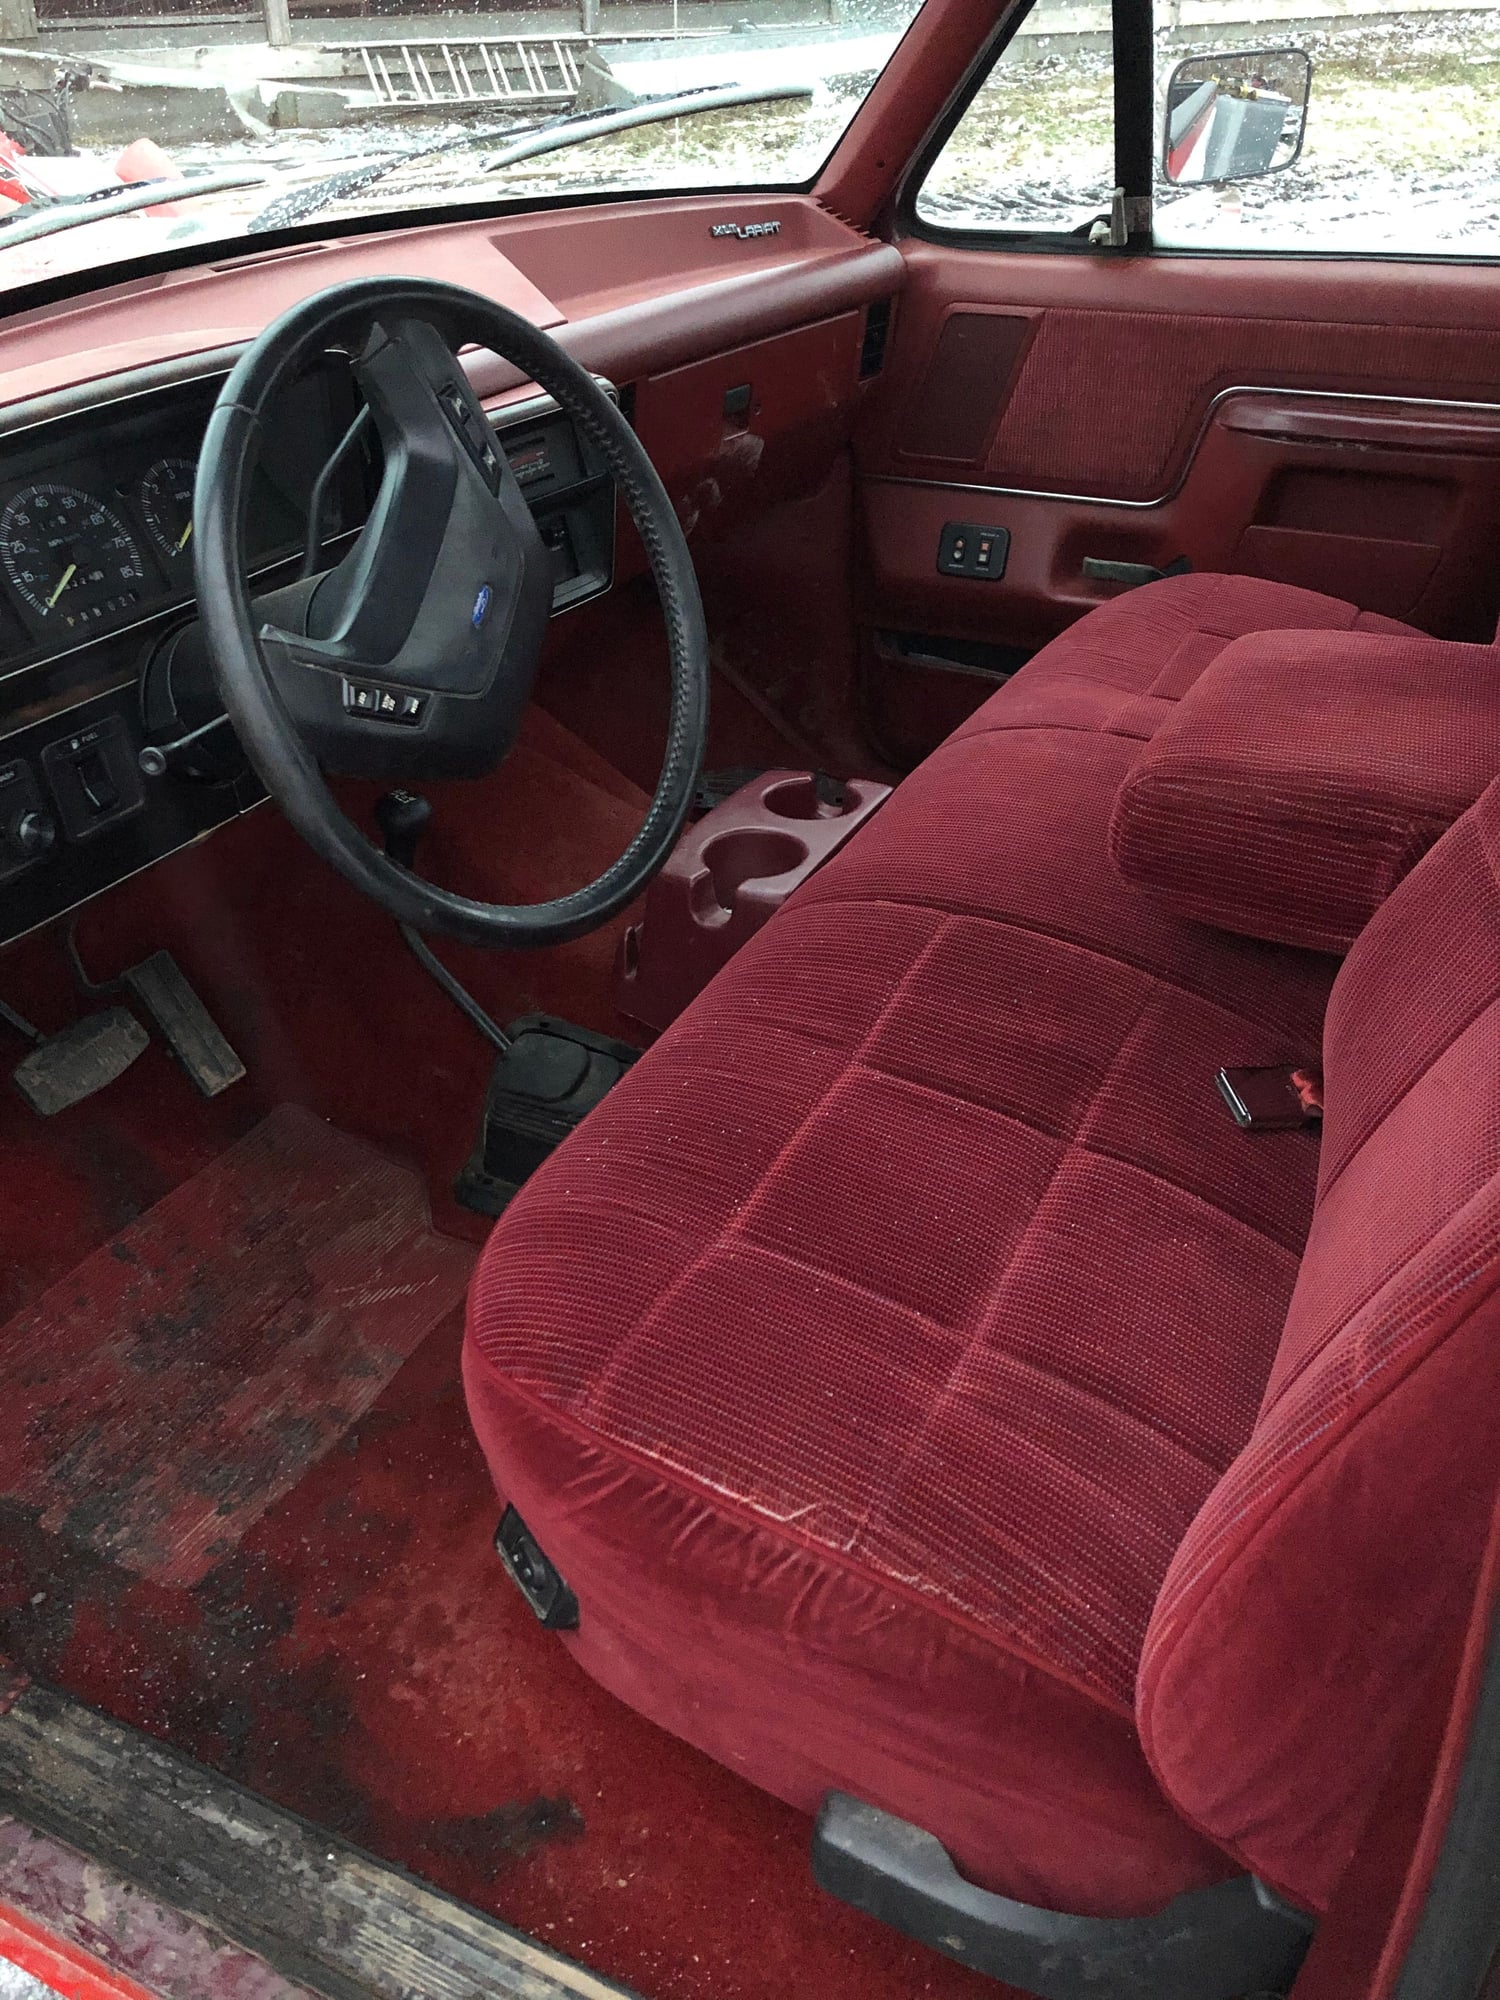 1991 Ford F-150 - Parting out 89 and 91 f150 - Boonville, NY 13309, United States